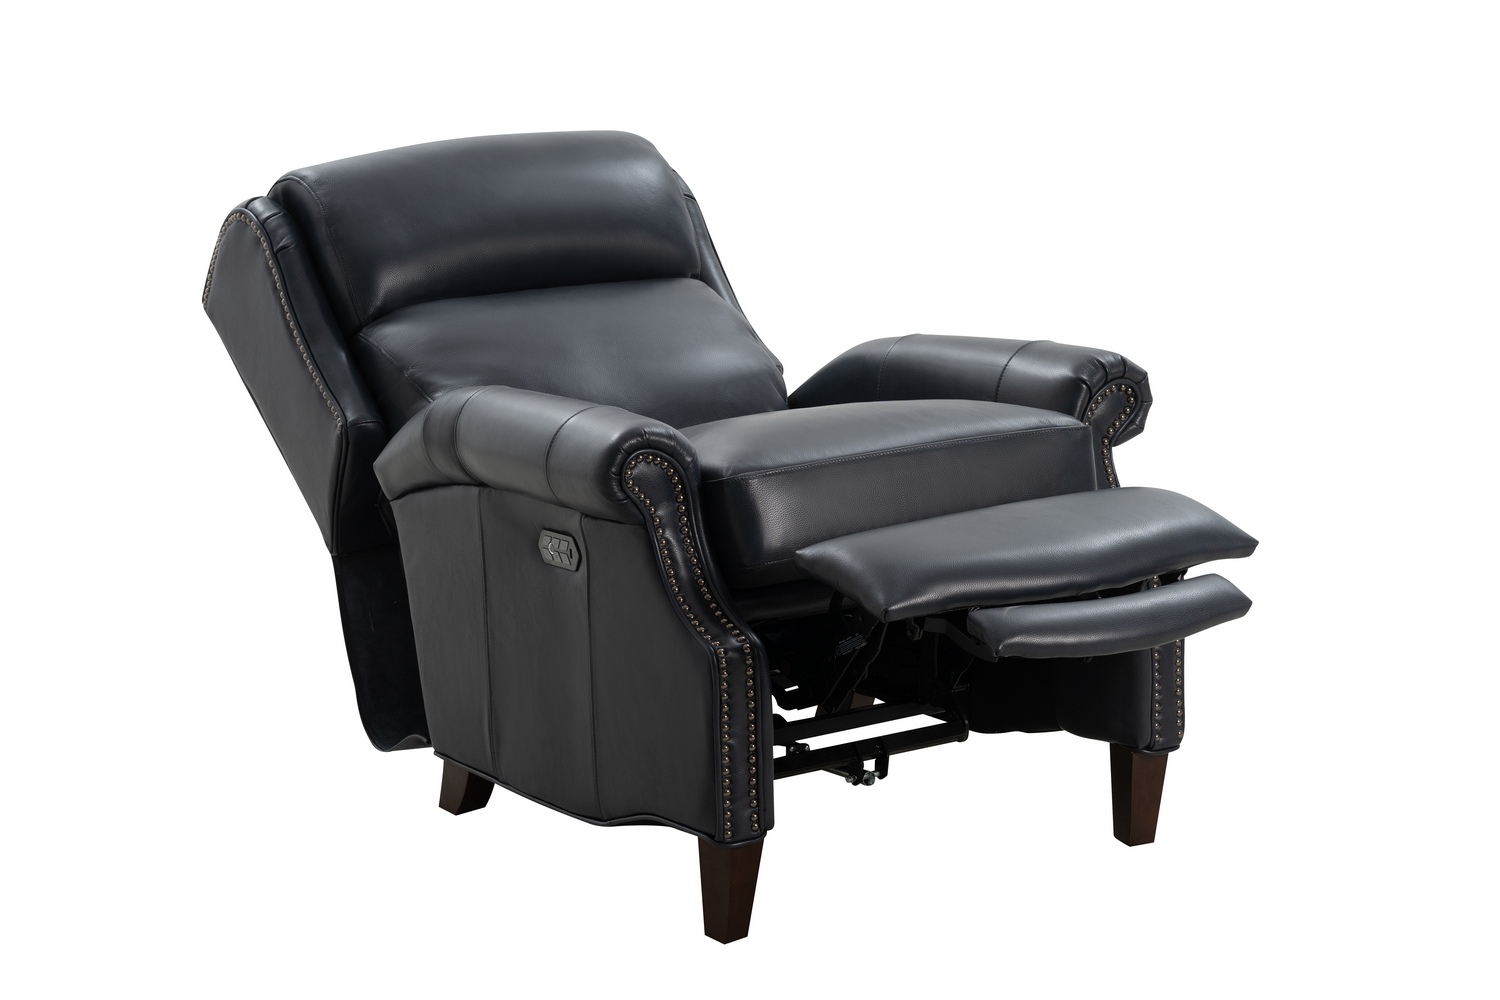 Barcalounger Philadelphia Power Recliner Chair with Power Head Rest and Lumbar - Barone Navy Blue/All Leather